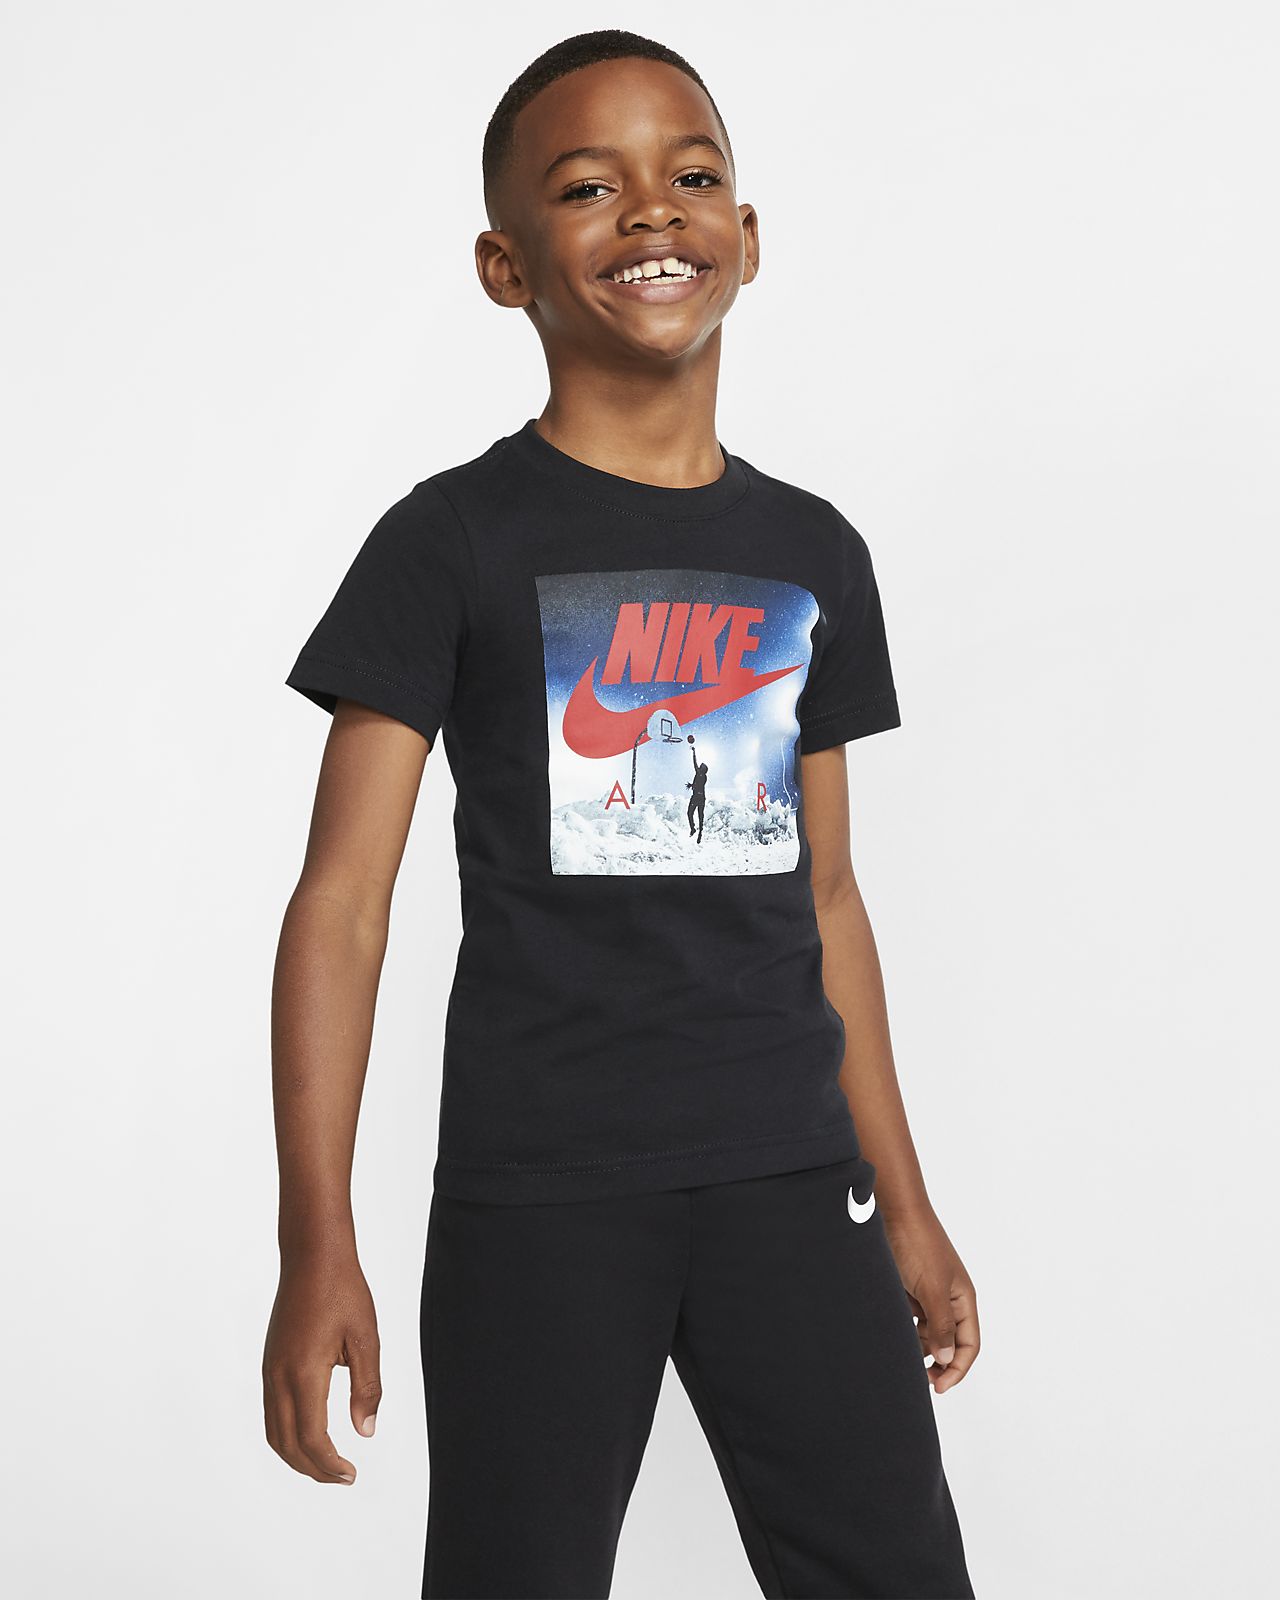 t shirt nike bambino italia Cheaper Than Retail Price\u003e Buy Clothing,  Accessories and lifestyle products for women \u0026 men -